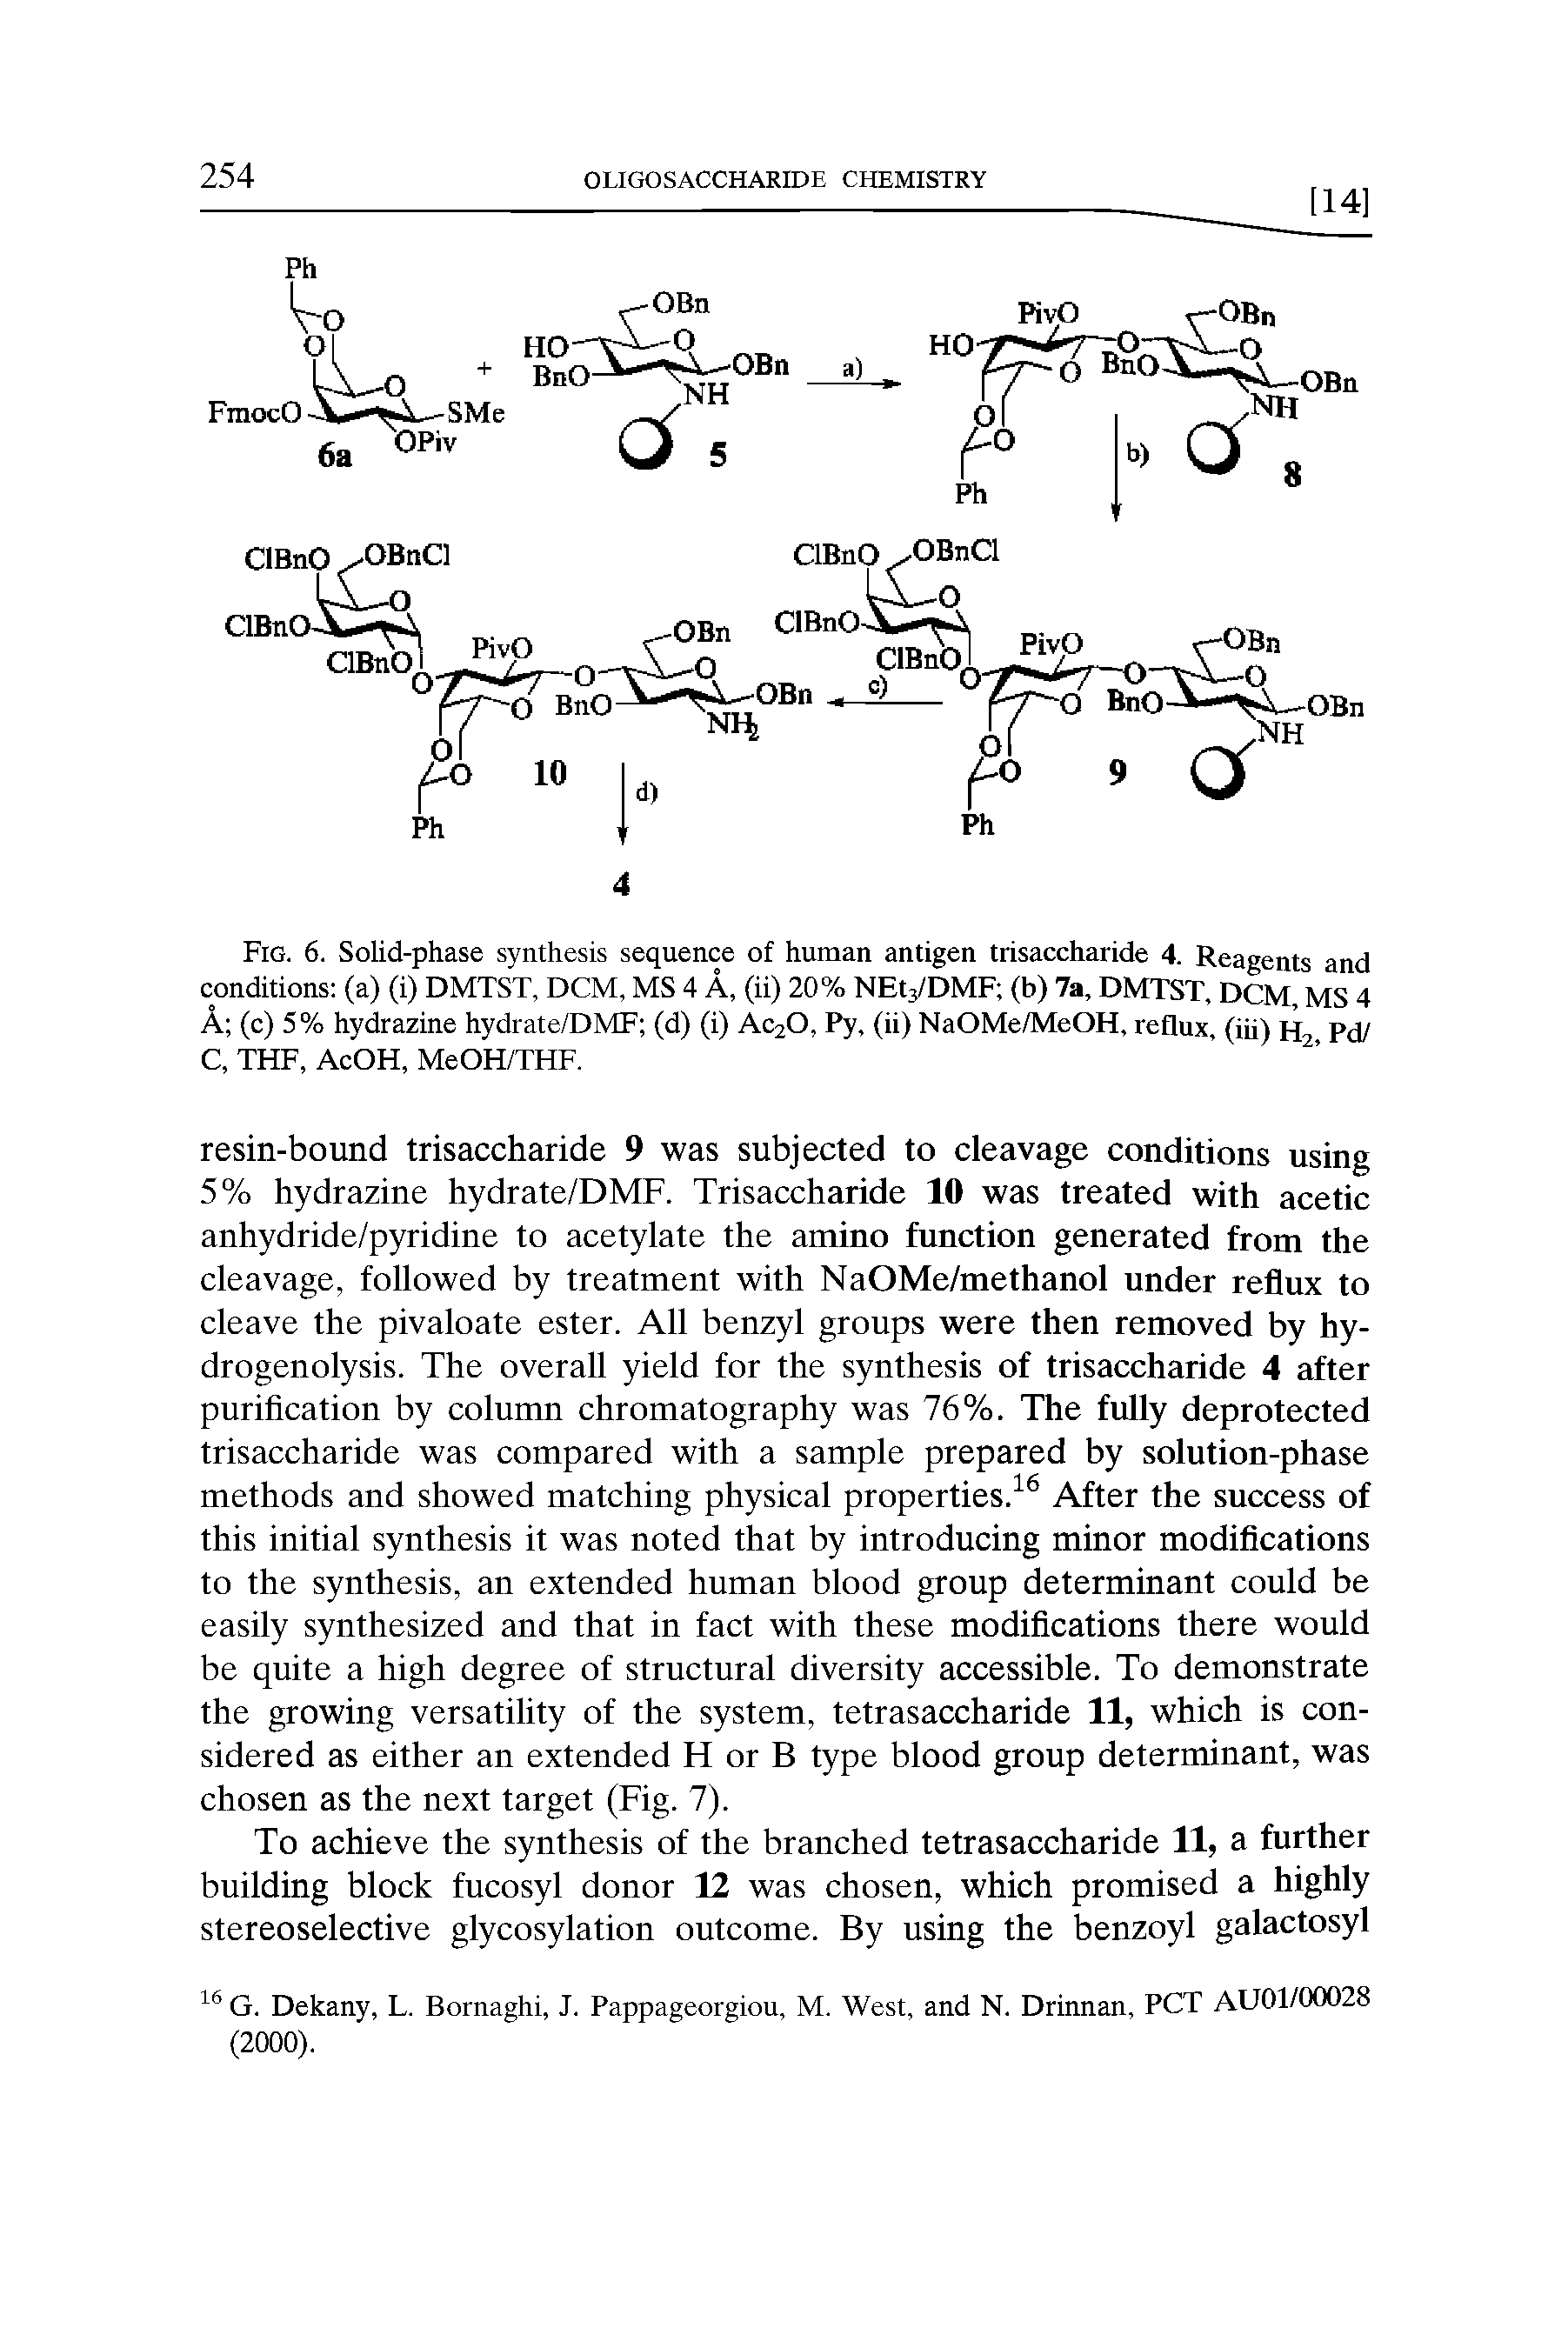 Fig. 6. Solid-phase synthesis sequence of human antigen trisaccharide 4. Reagents and conditions (a) (i) DMTST, DCM, MS 4 A, (ii) 20% NEt3/DMF (b) 7a, DMTST, DCM MS 4 A (c) 5% hydrazine hydrate/DMF (d) (i) Ac20, Py, (ii) NaOMe/MeOH, reflux, (in) H2 Pd/ C, THF, AcOH, MeOH/THF.